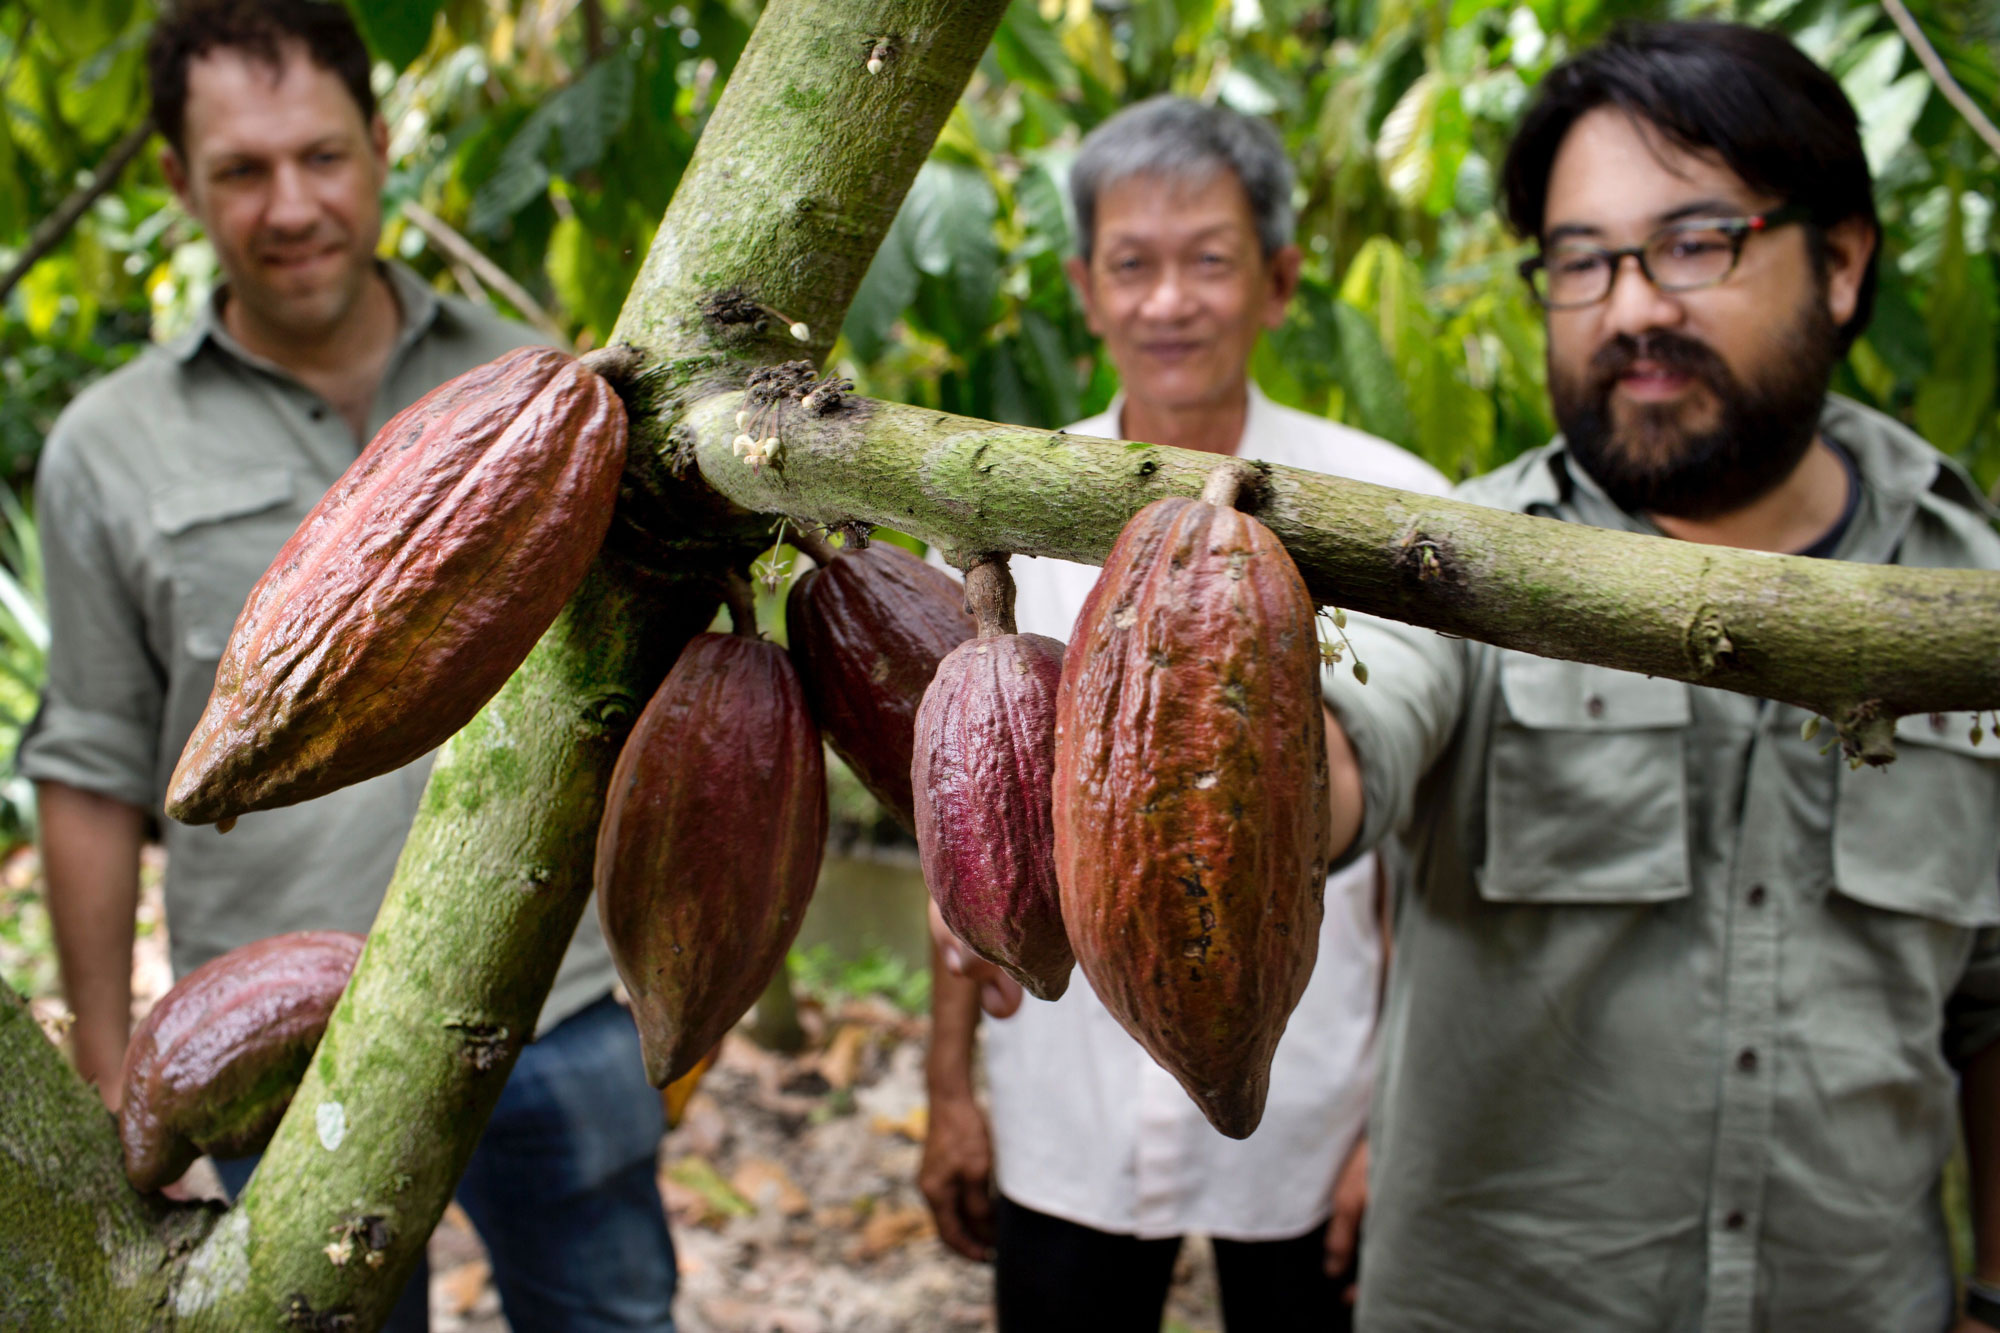 sam and vincent visit mr lau's farm in tien giang province marou chocolate